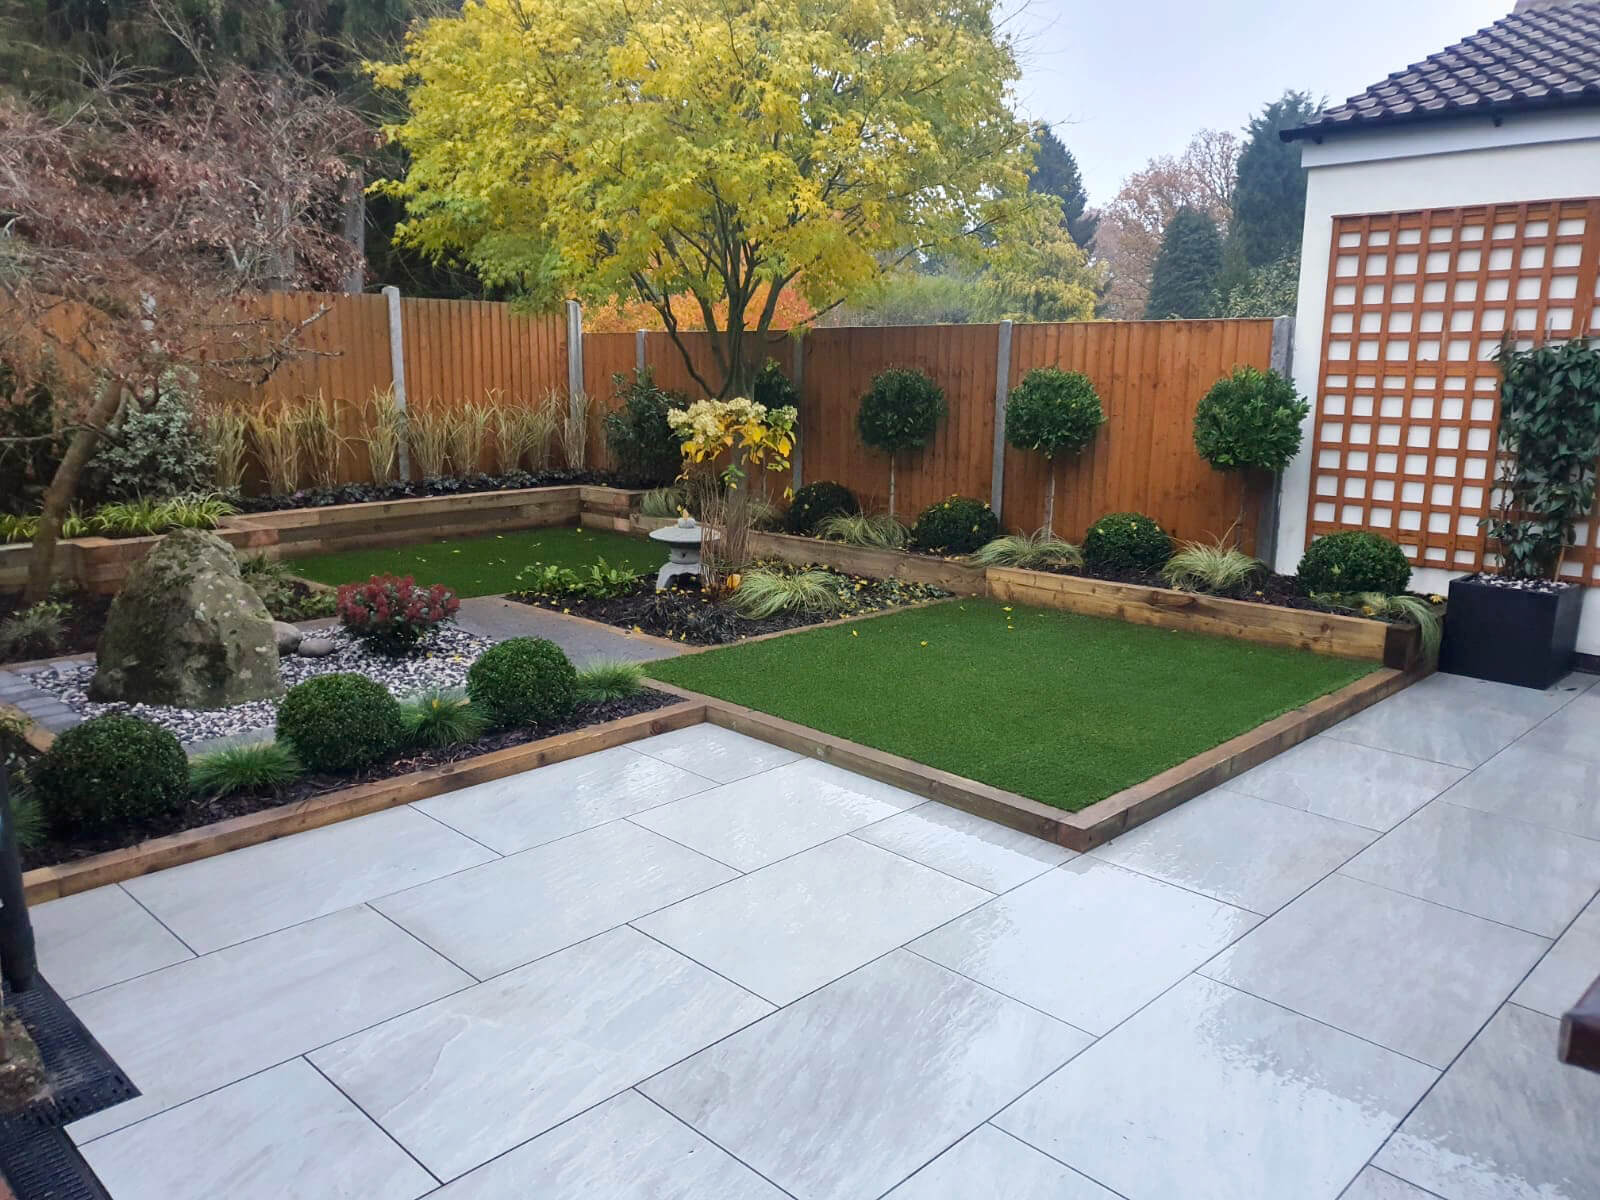 Garden Design with Paving and Raised Planters